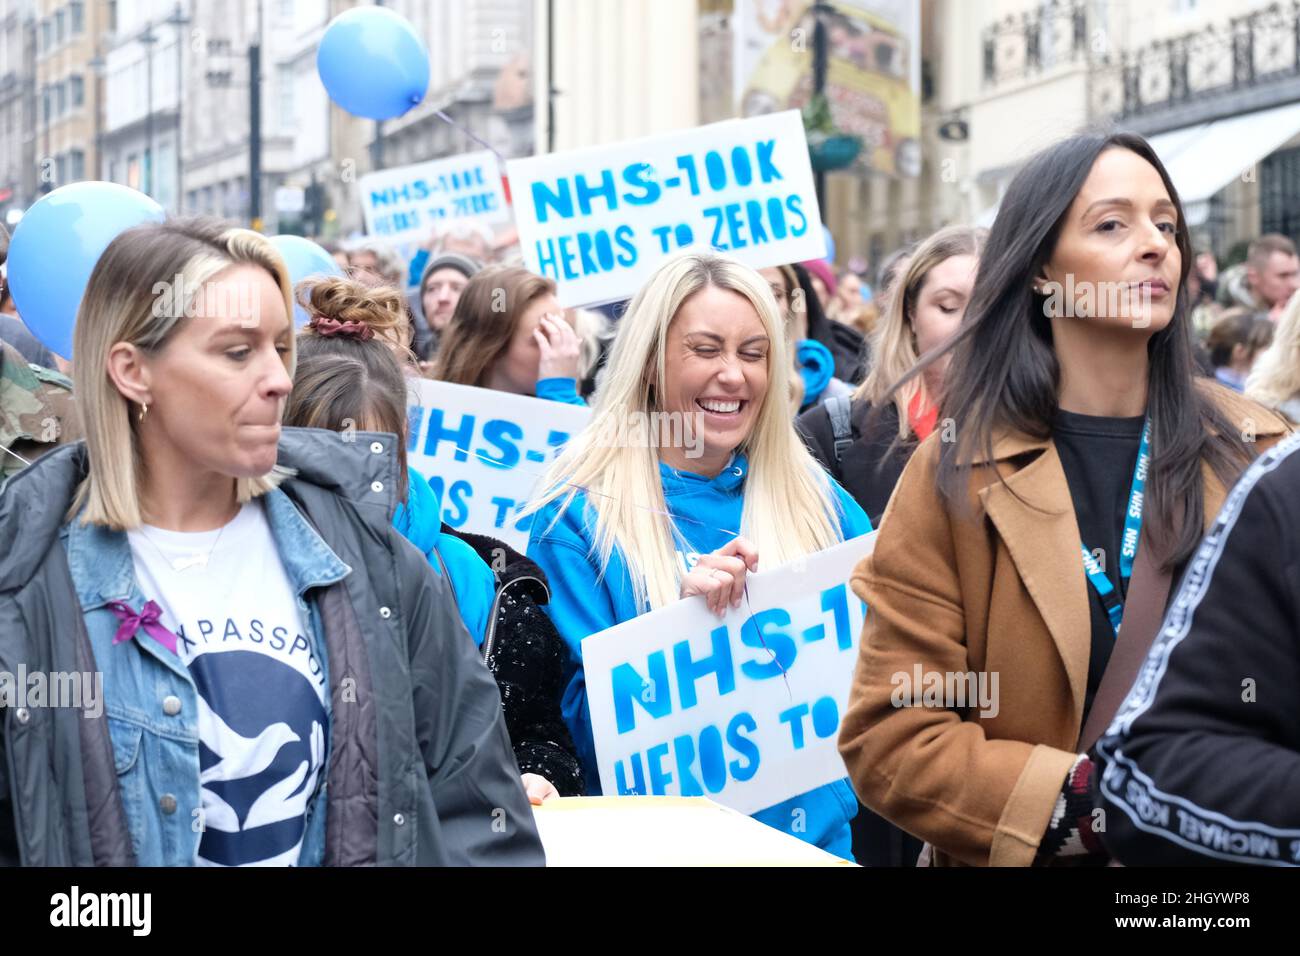 London, UK, 22nd Jan, 2022.  National Health Service workers supported by campaign group NHS100K took part  in rally for medical freedom.  Up to 100,000 unvaccinated staff face dismissal by April 1st unless agreeing to take the first dose of the vaccine by 3rd February at the latest. Credit: Eleventh Hour Photography/Alamy Live News Stock Photo